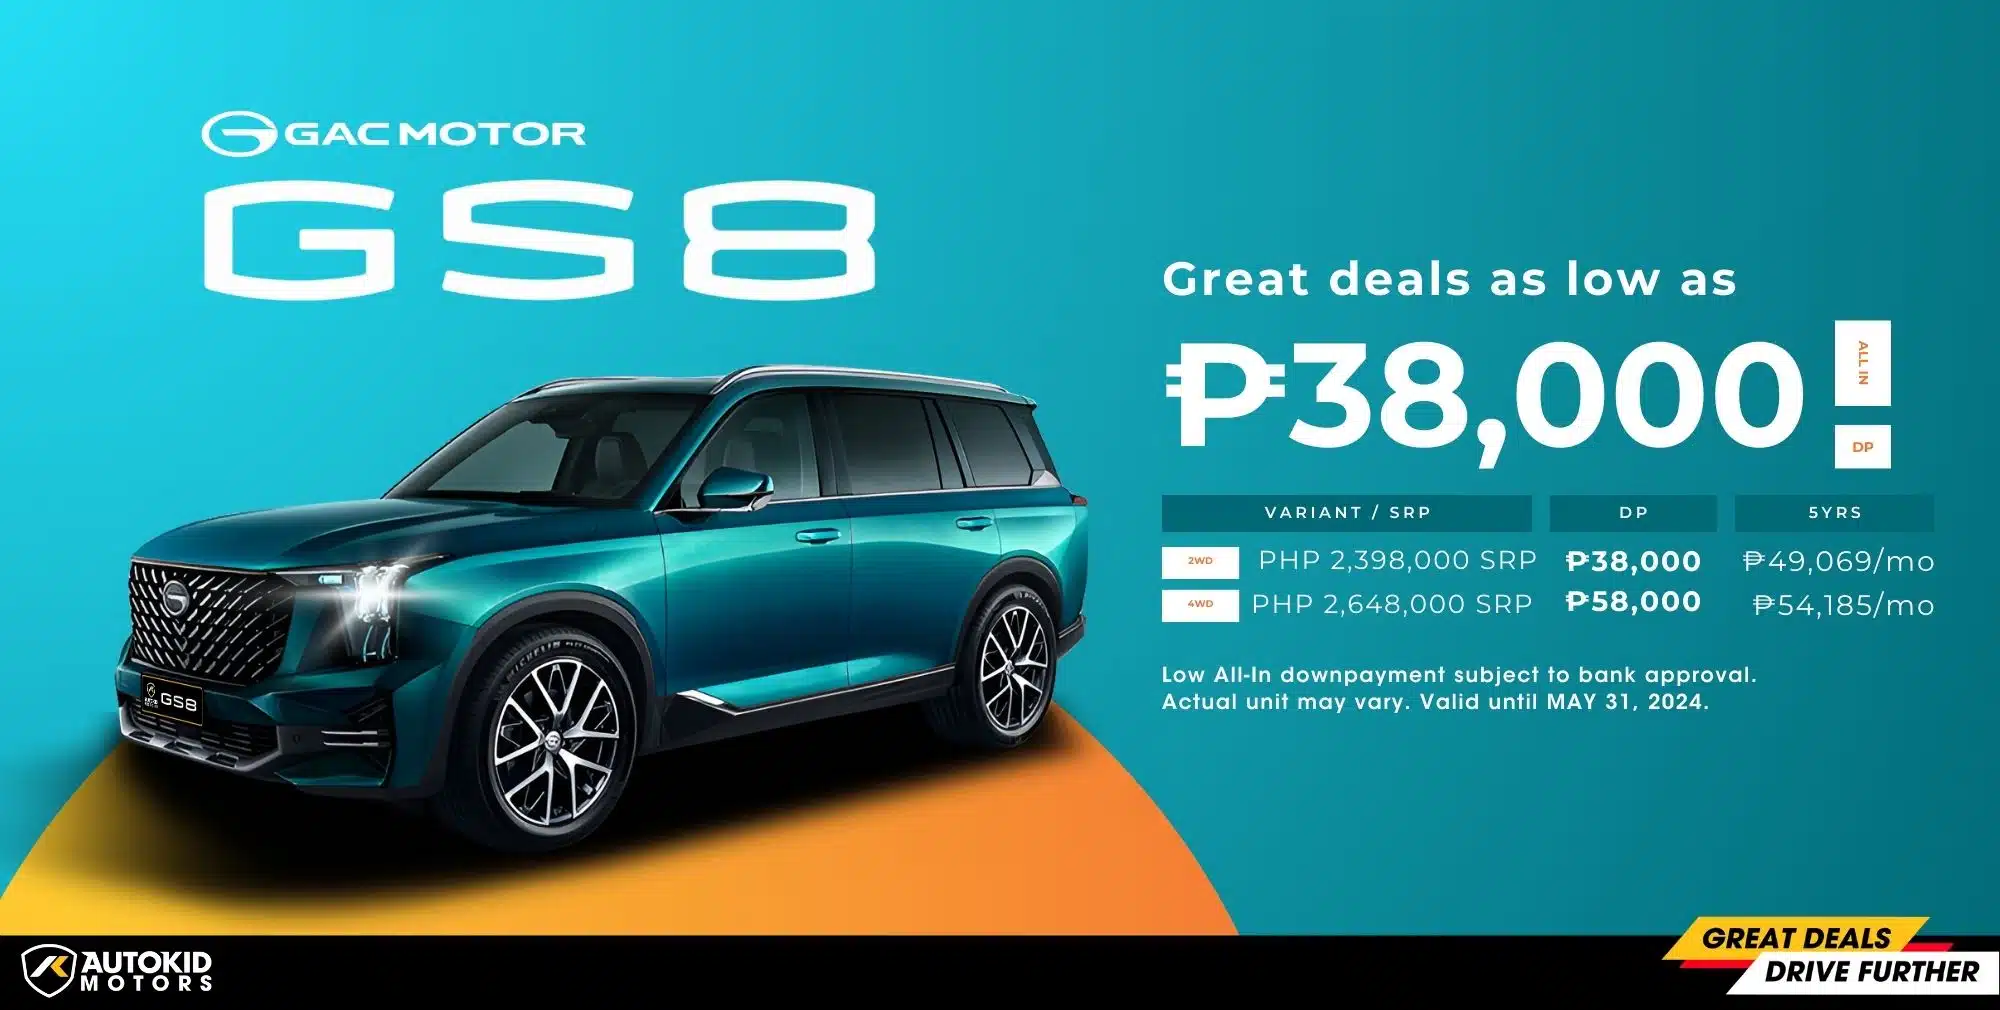 GAC GS8 lowest down payment on car Philippines